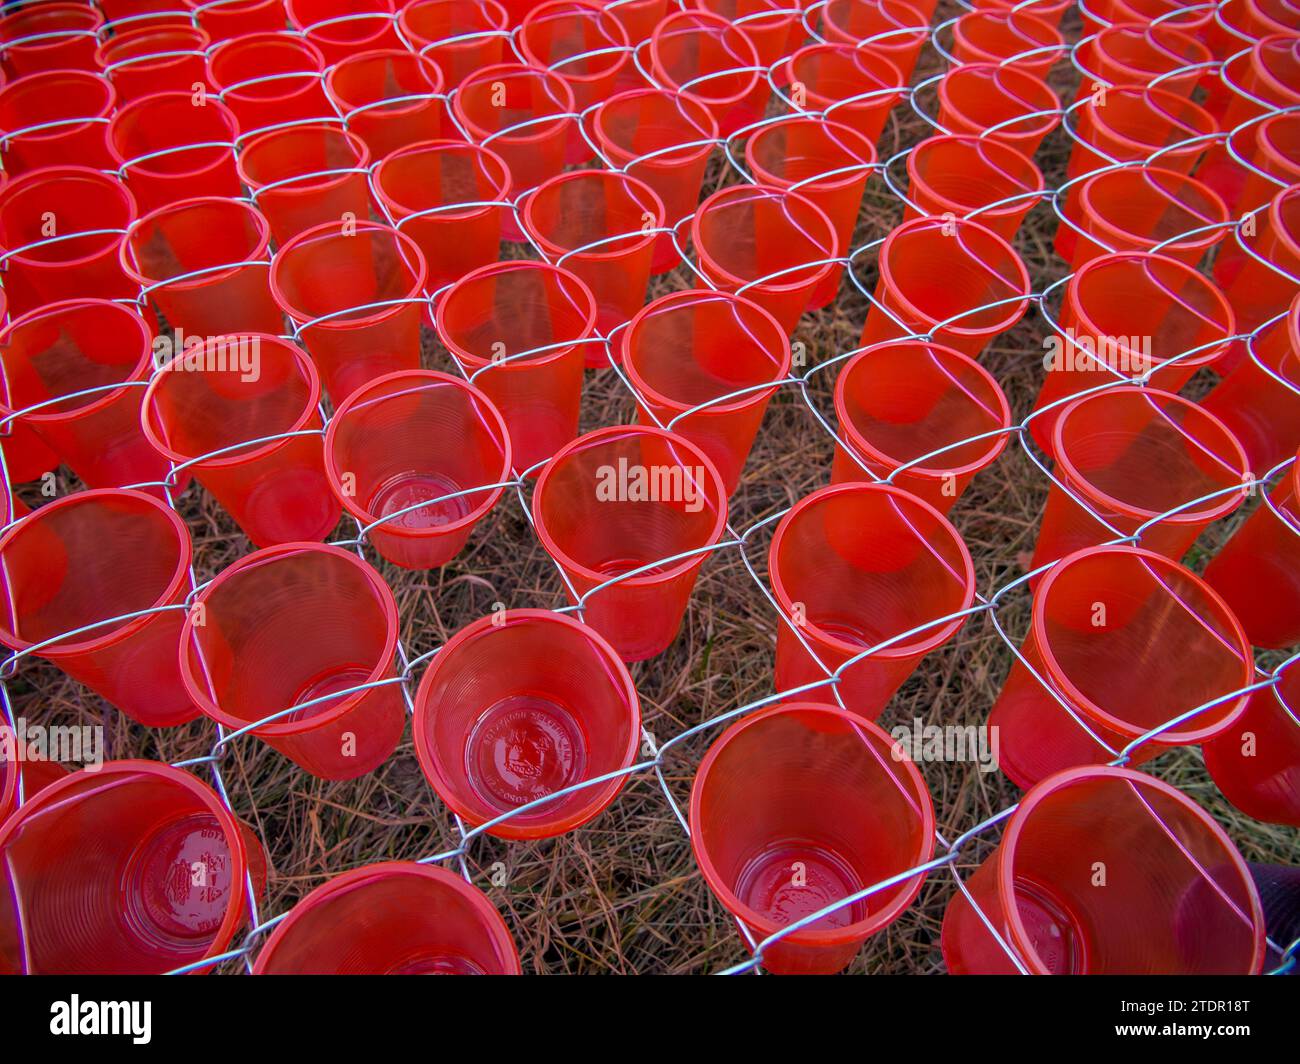 Plastic cups as a decorative element in the cells of the chain-link mesh Stock Photo